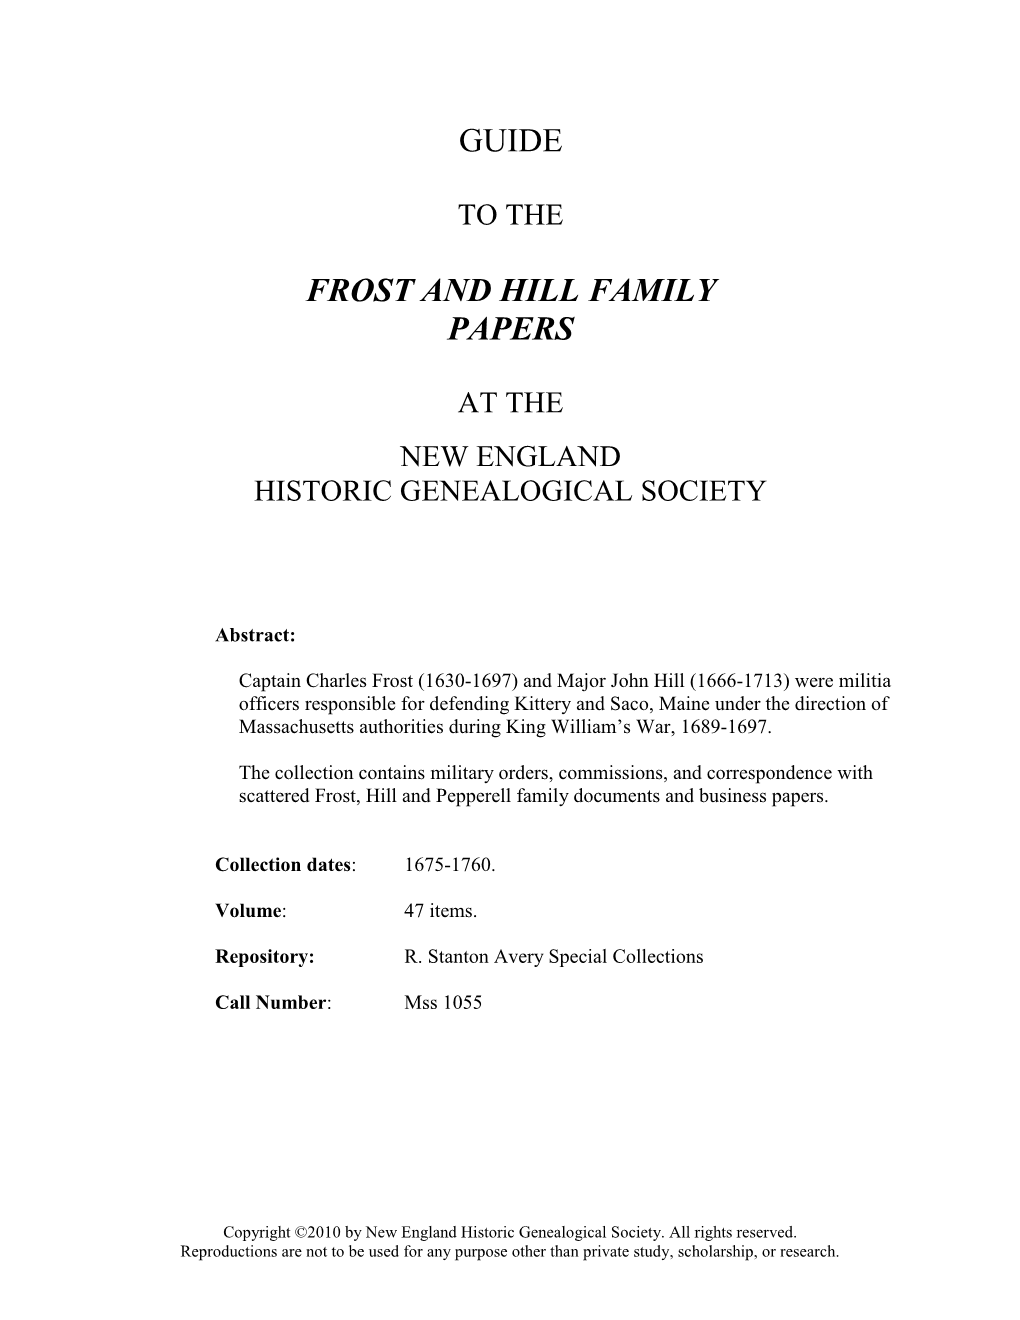 Guide to the Frost and Hill Family Papers